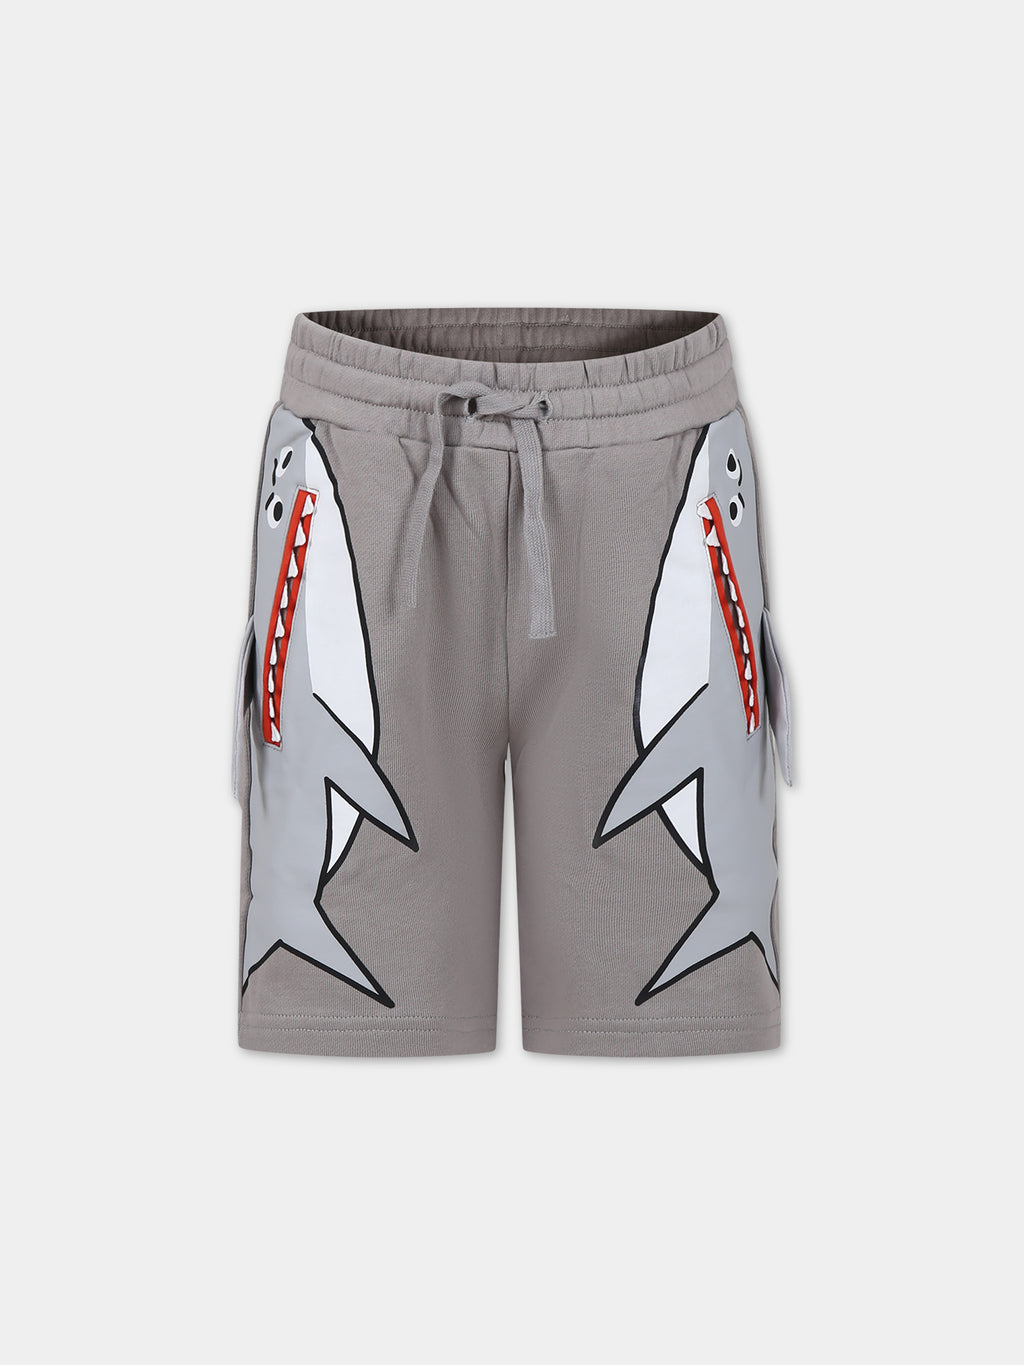 Gray shorts for boy with sharks